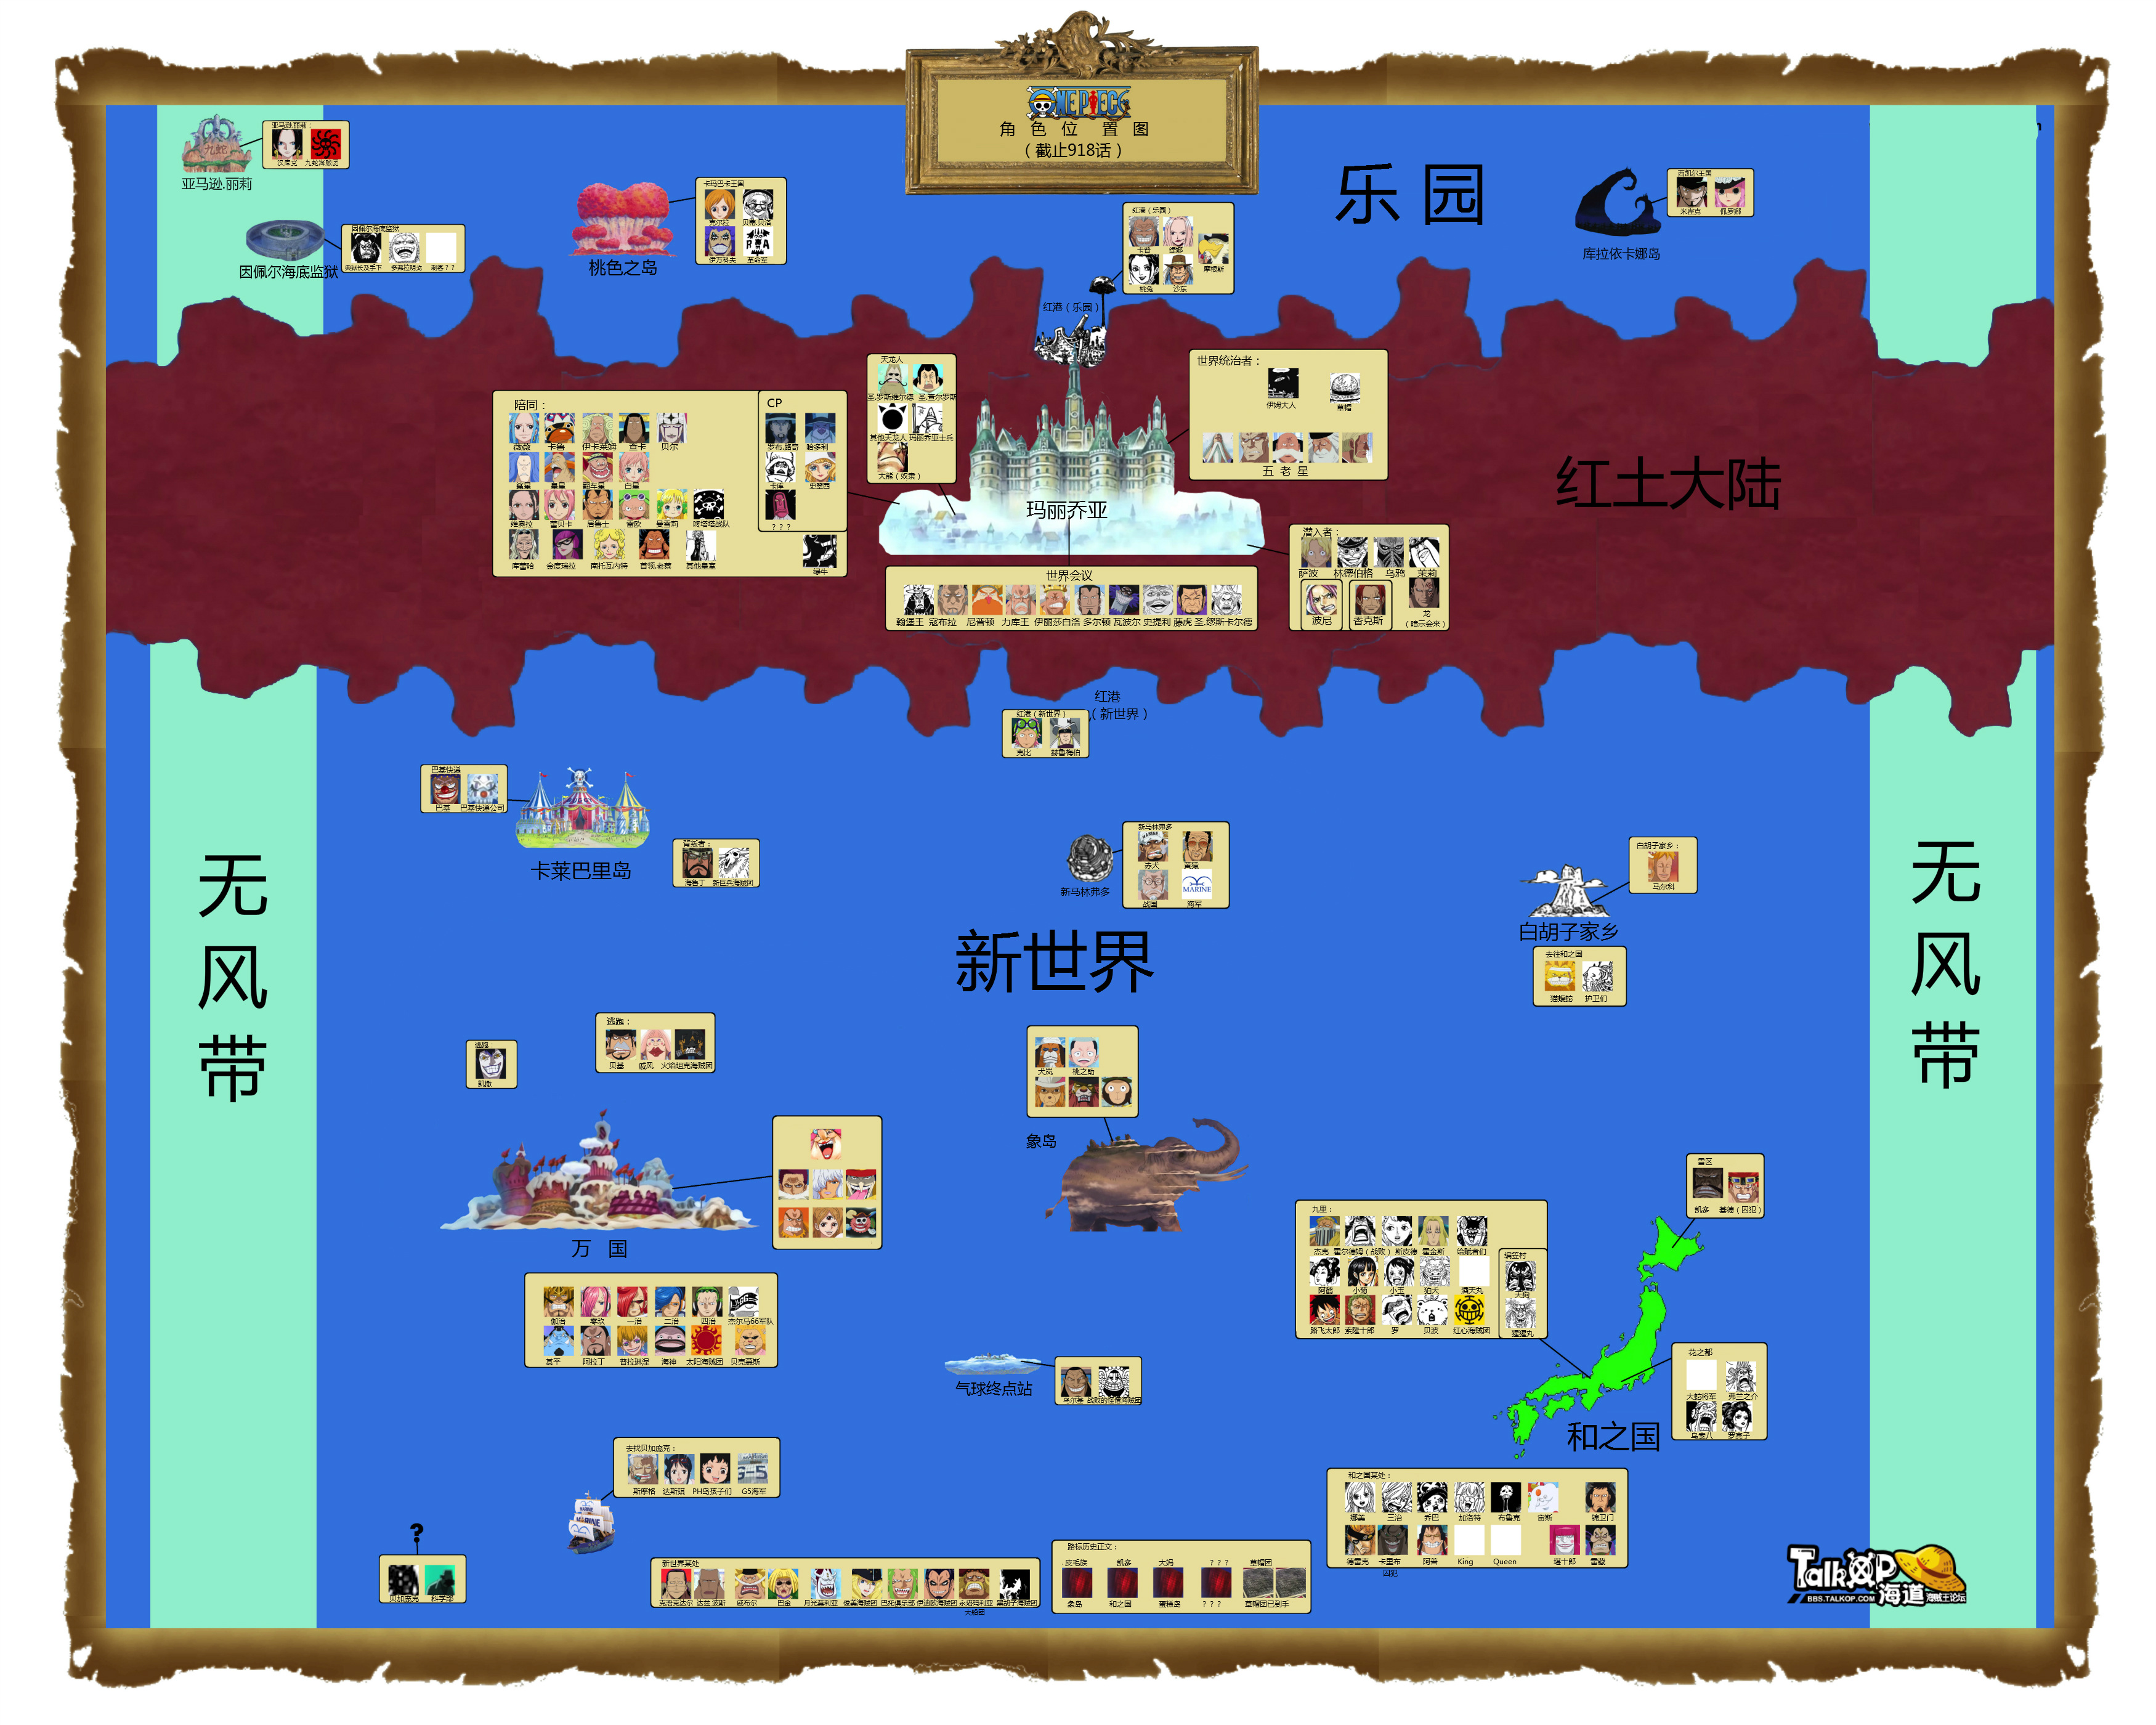 one-piece-character-location-map-talkop.jpg